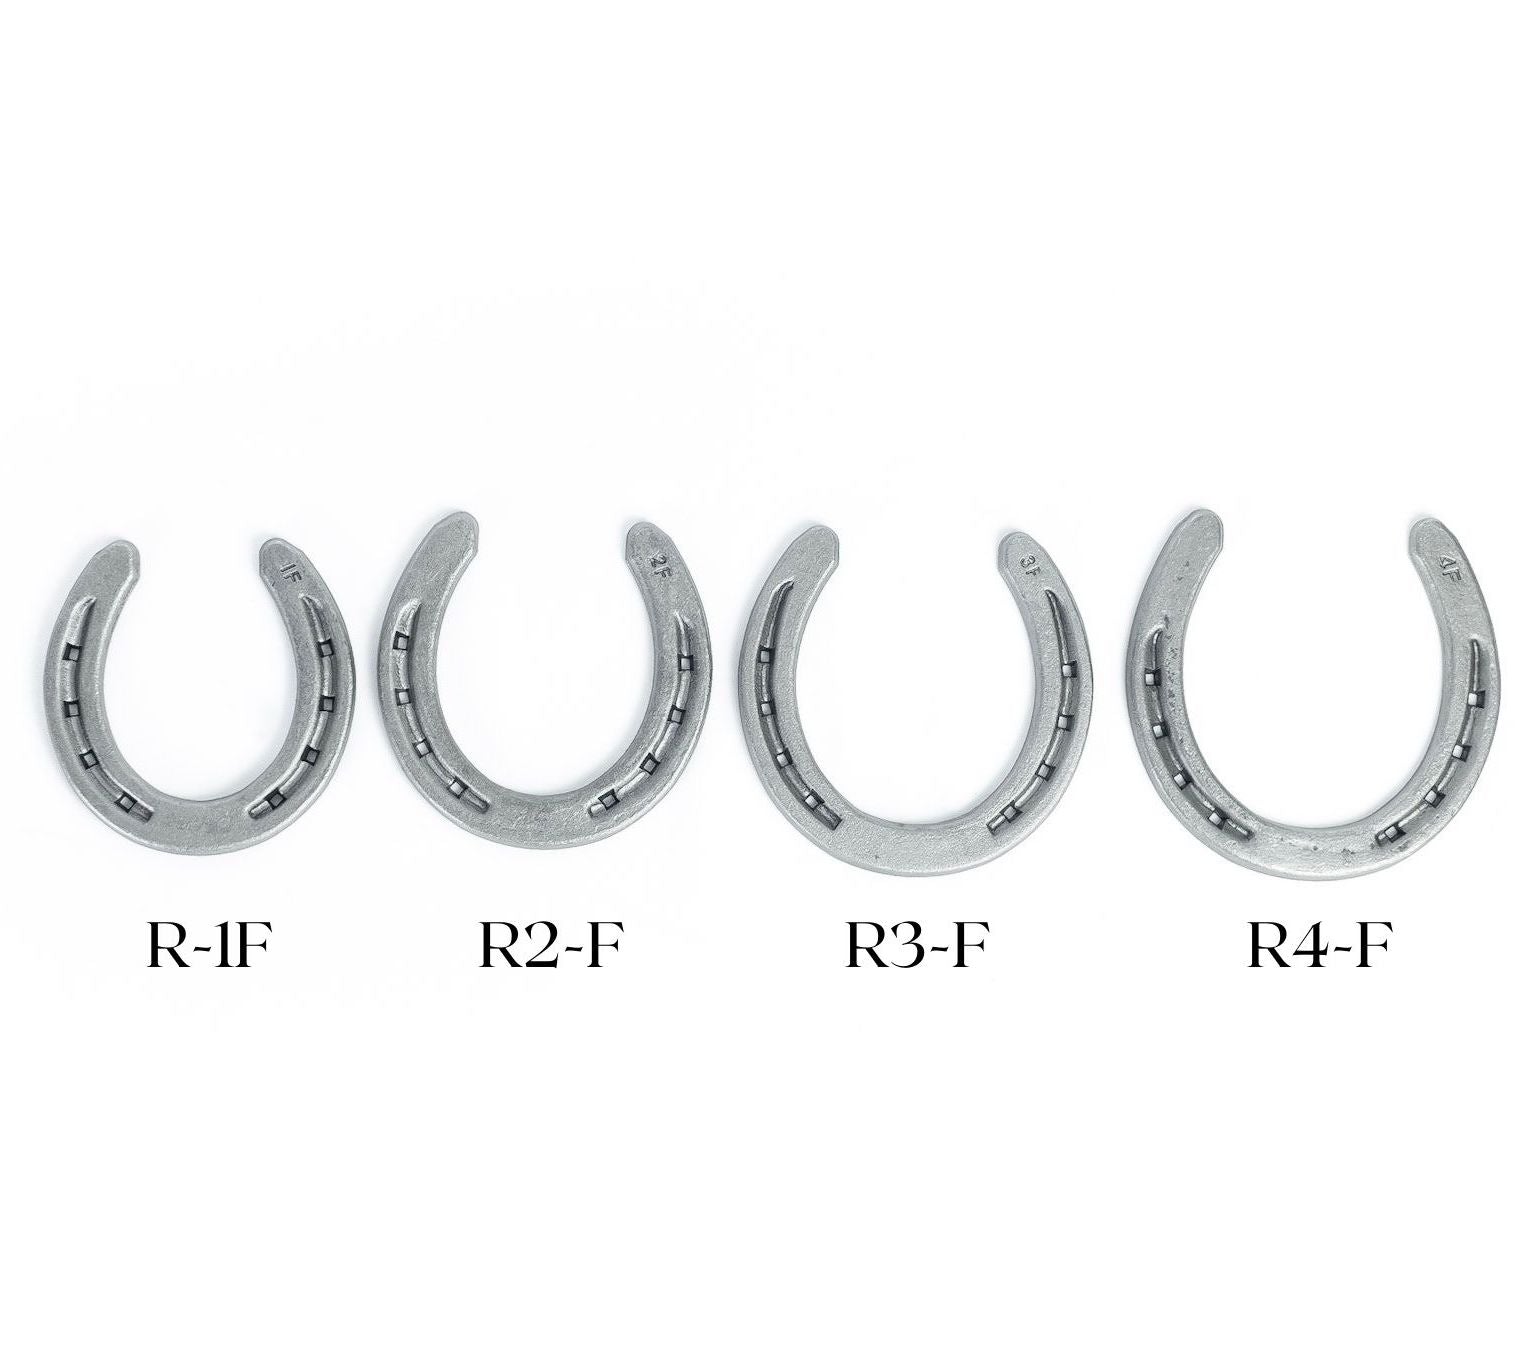 New Steel Horseshoes - RDM Size 000 - R1-F -Sand Blasted Steel - The Heritage Forge